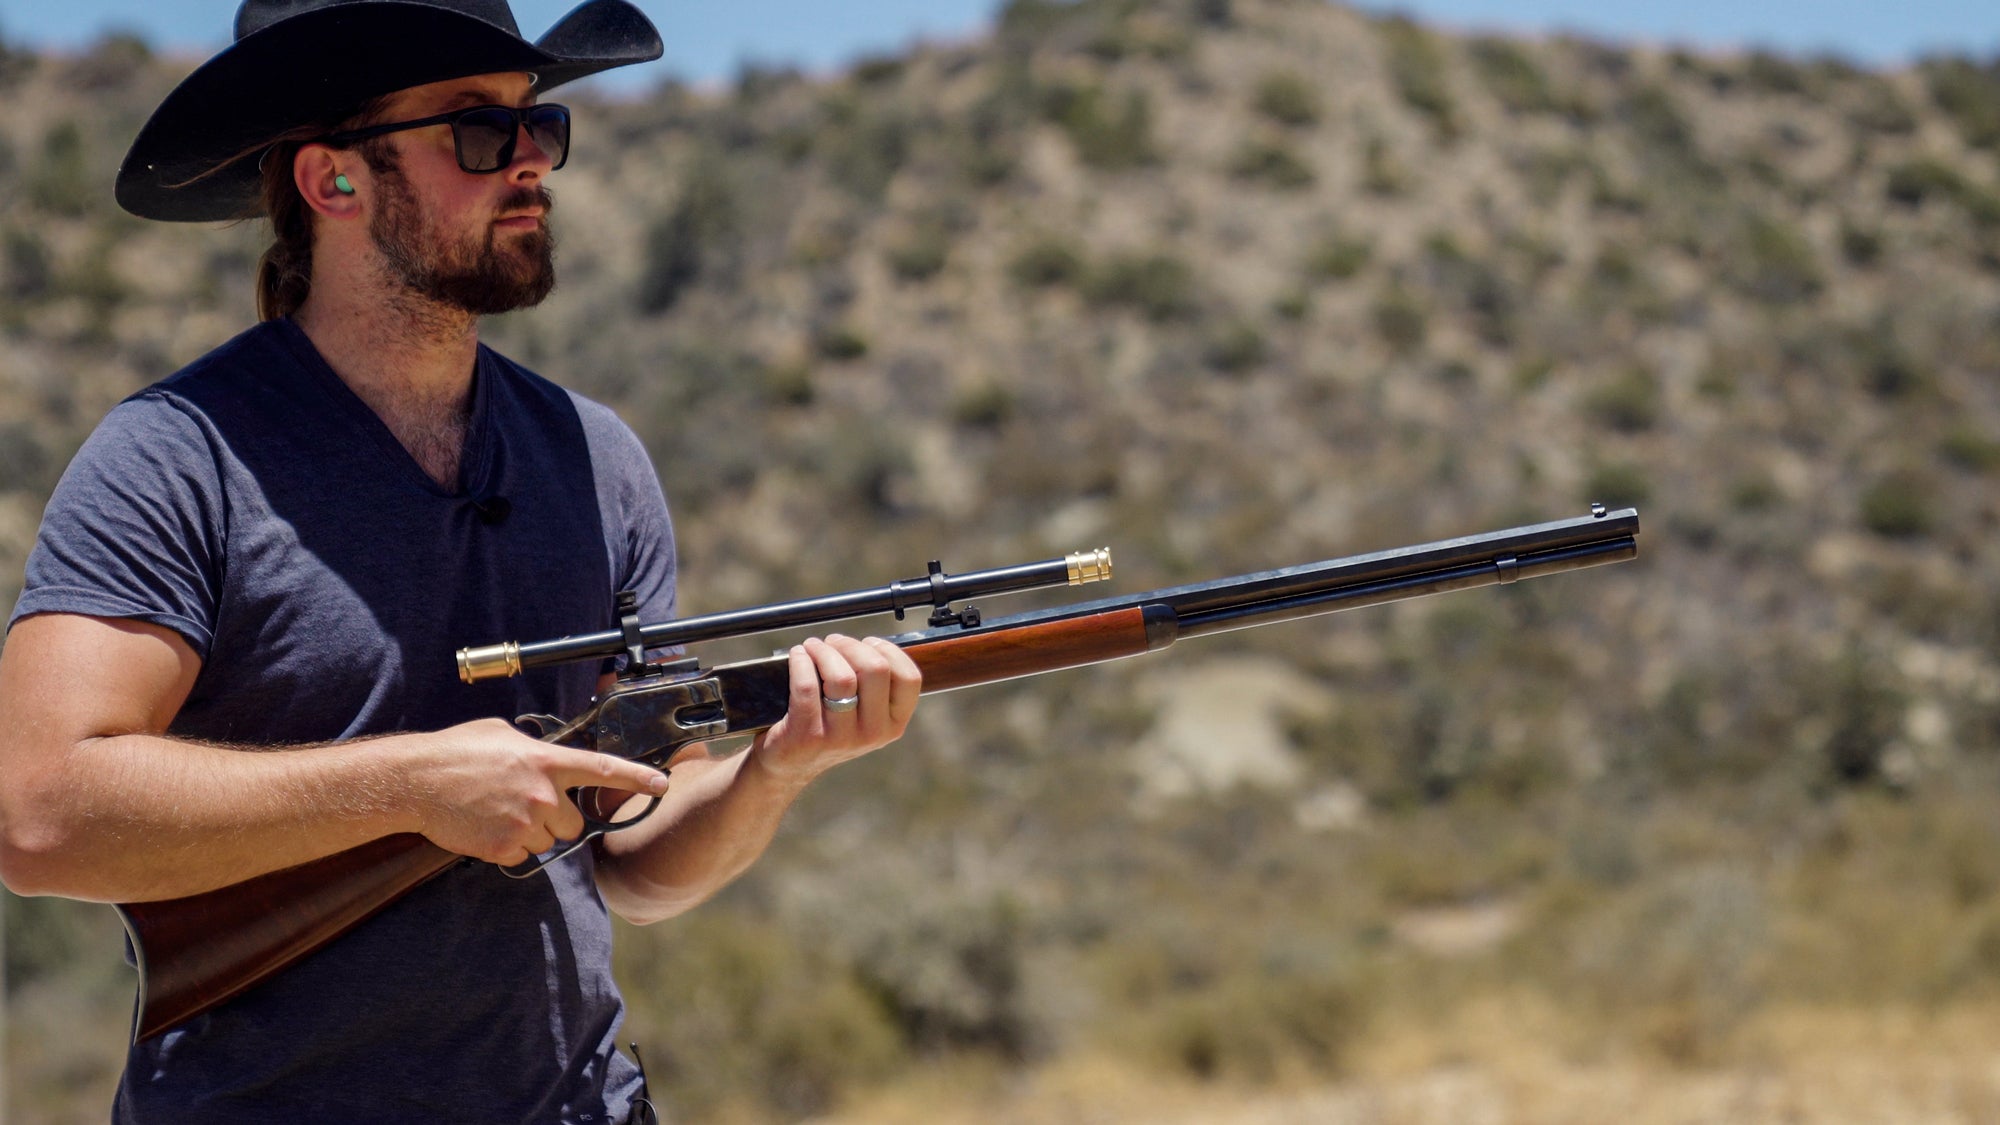 The Winchester 1873 and appropriate hat